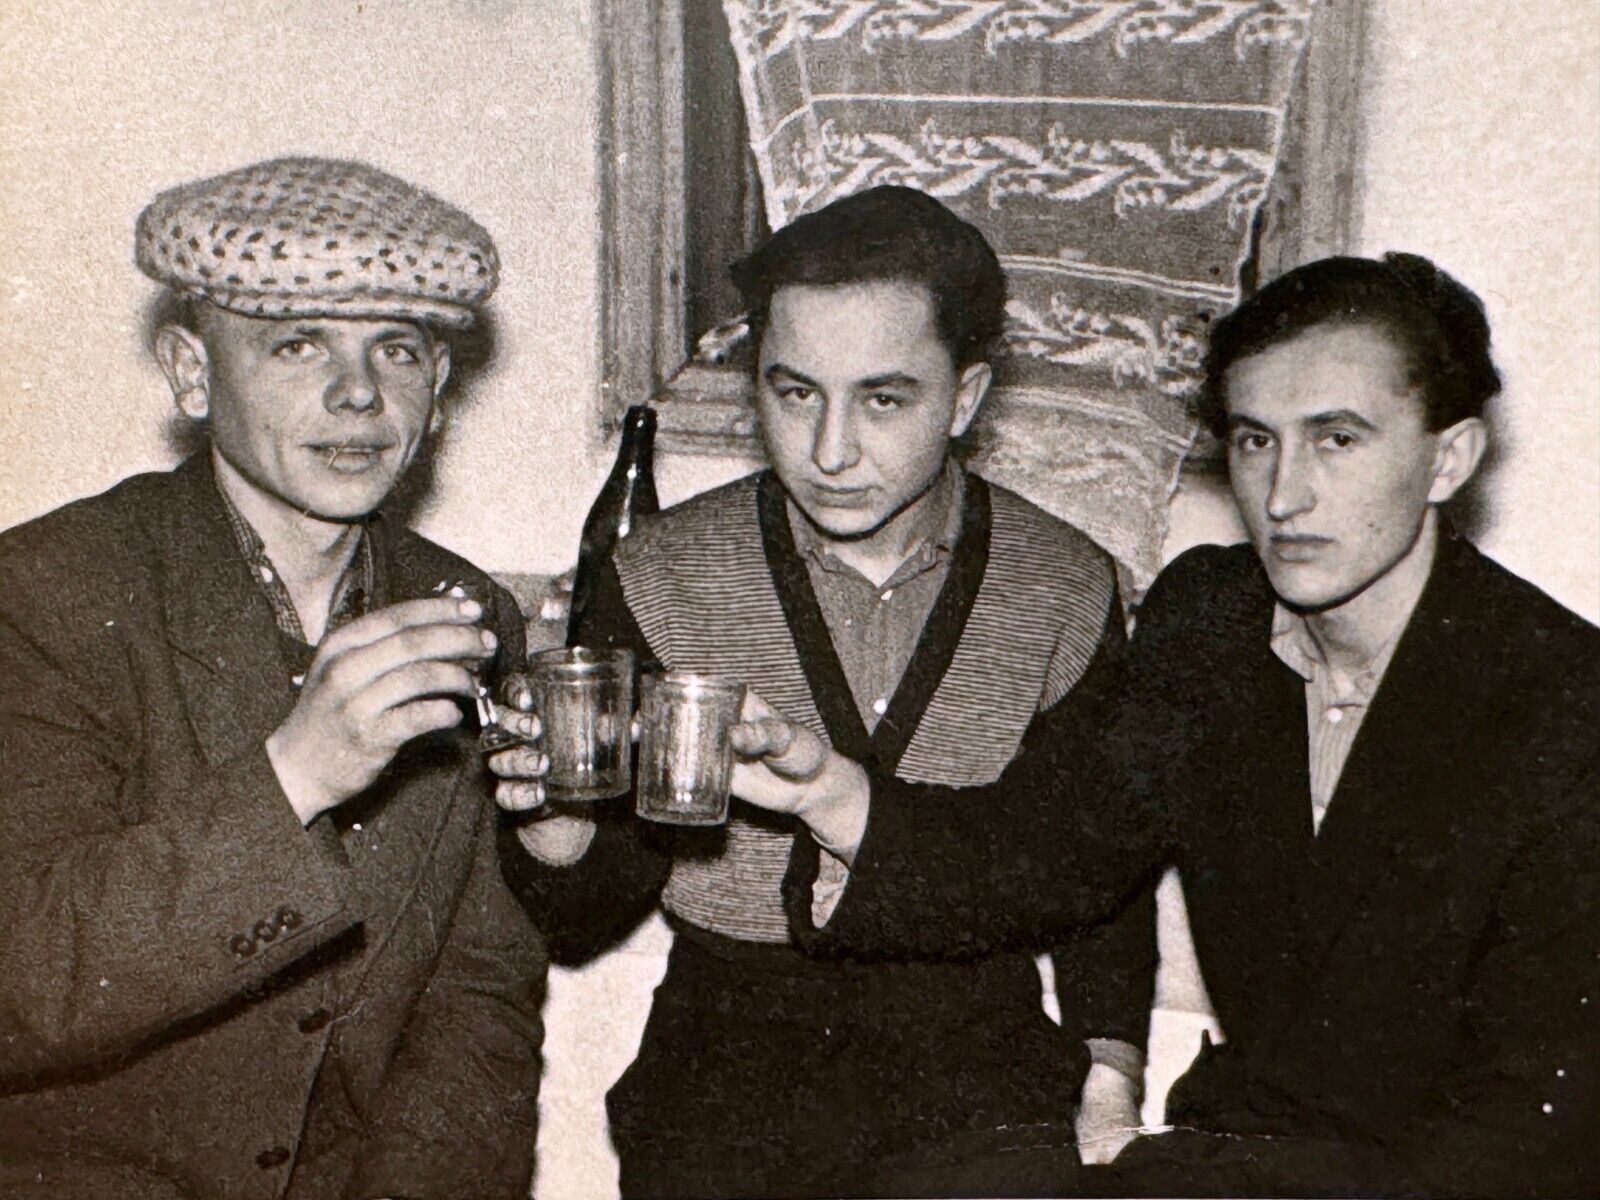 1950s Three Handsome Young Men Alcohol Party Gay Int B&W Photo Snapshot